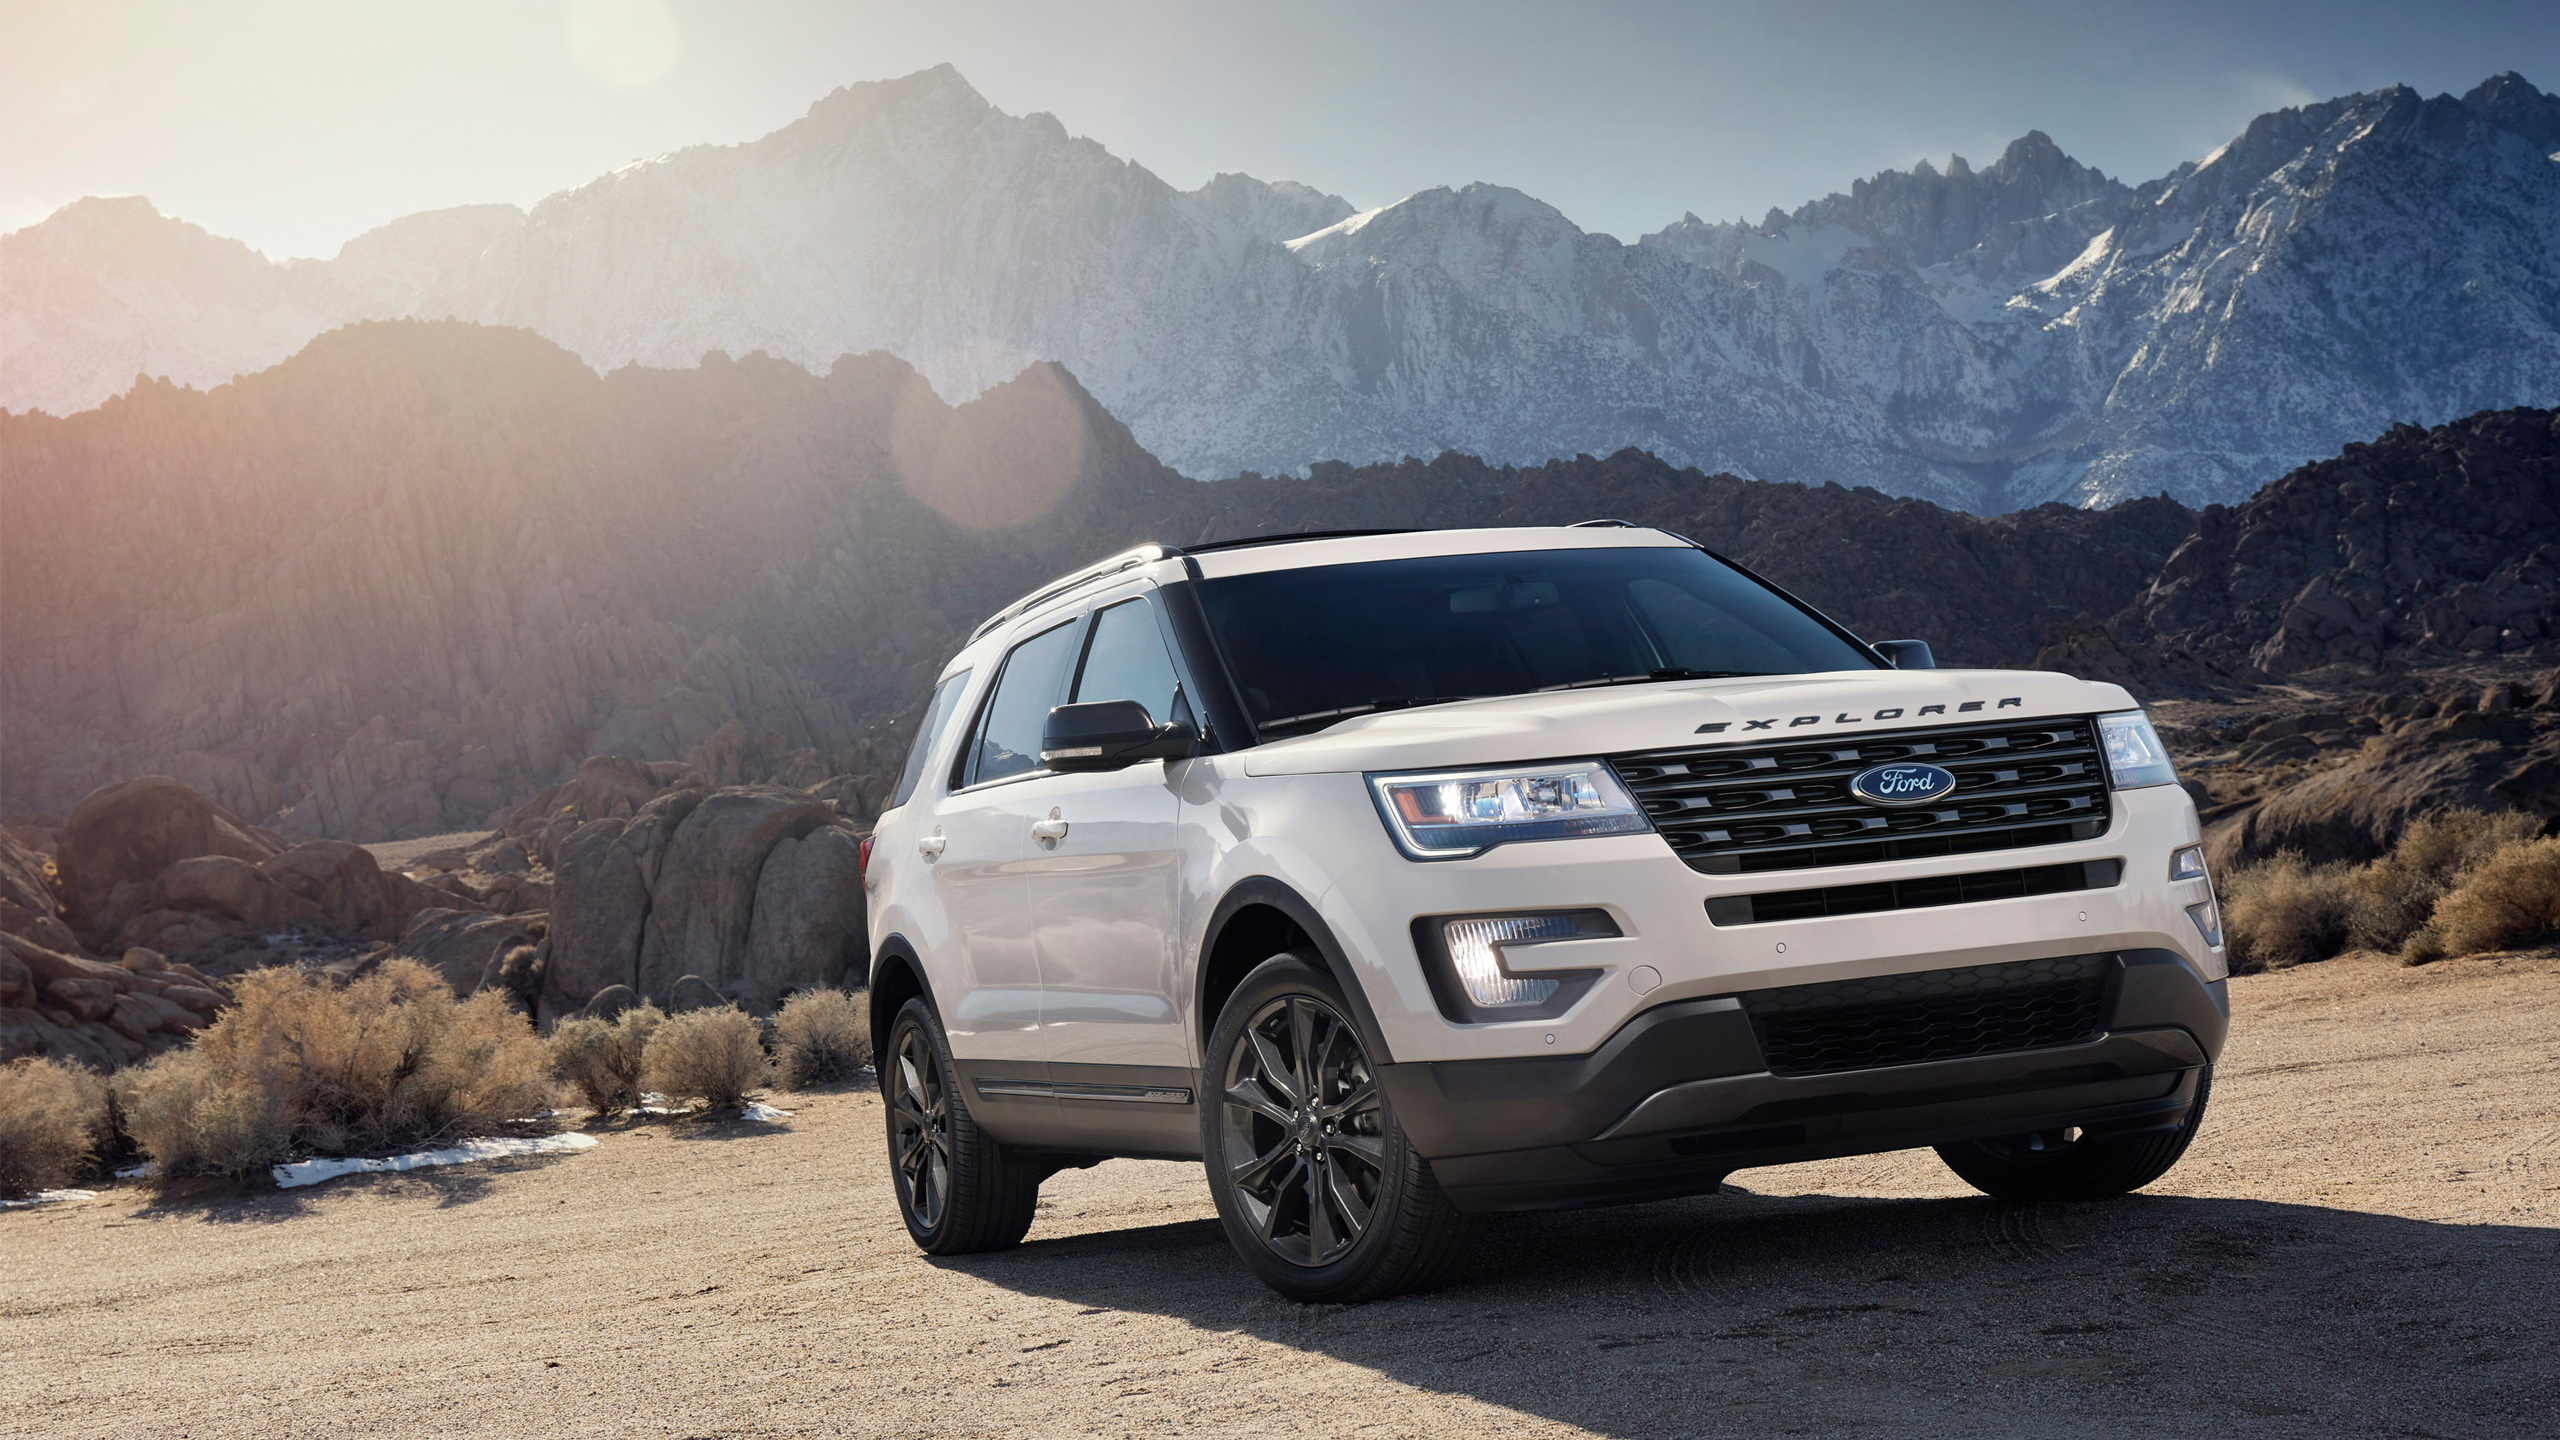 17 Ford Explorer Xlt Appearance Package Wallpaper Hd Car Wallpapers Id 6144